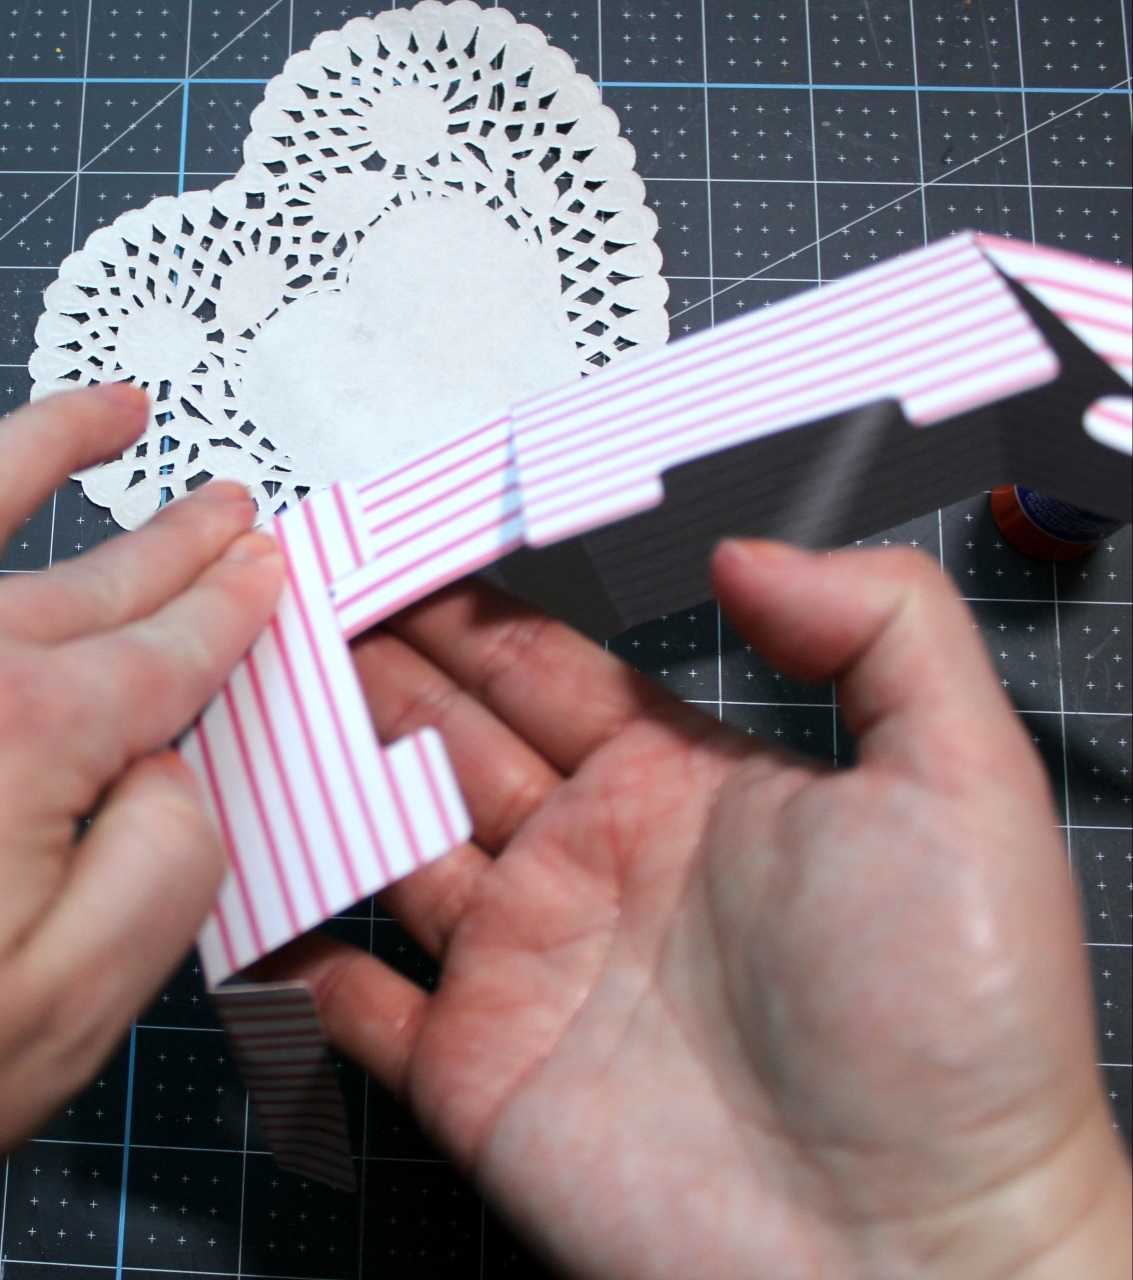 Folding the two pieces of cardstock together on the glue to form the box for the Valentines Day friends gift.